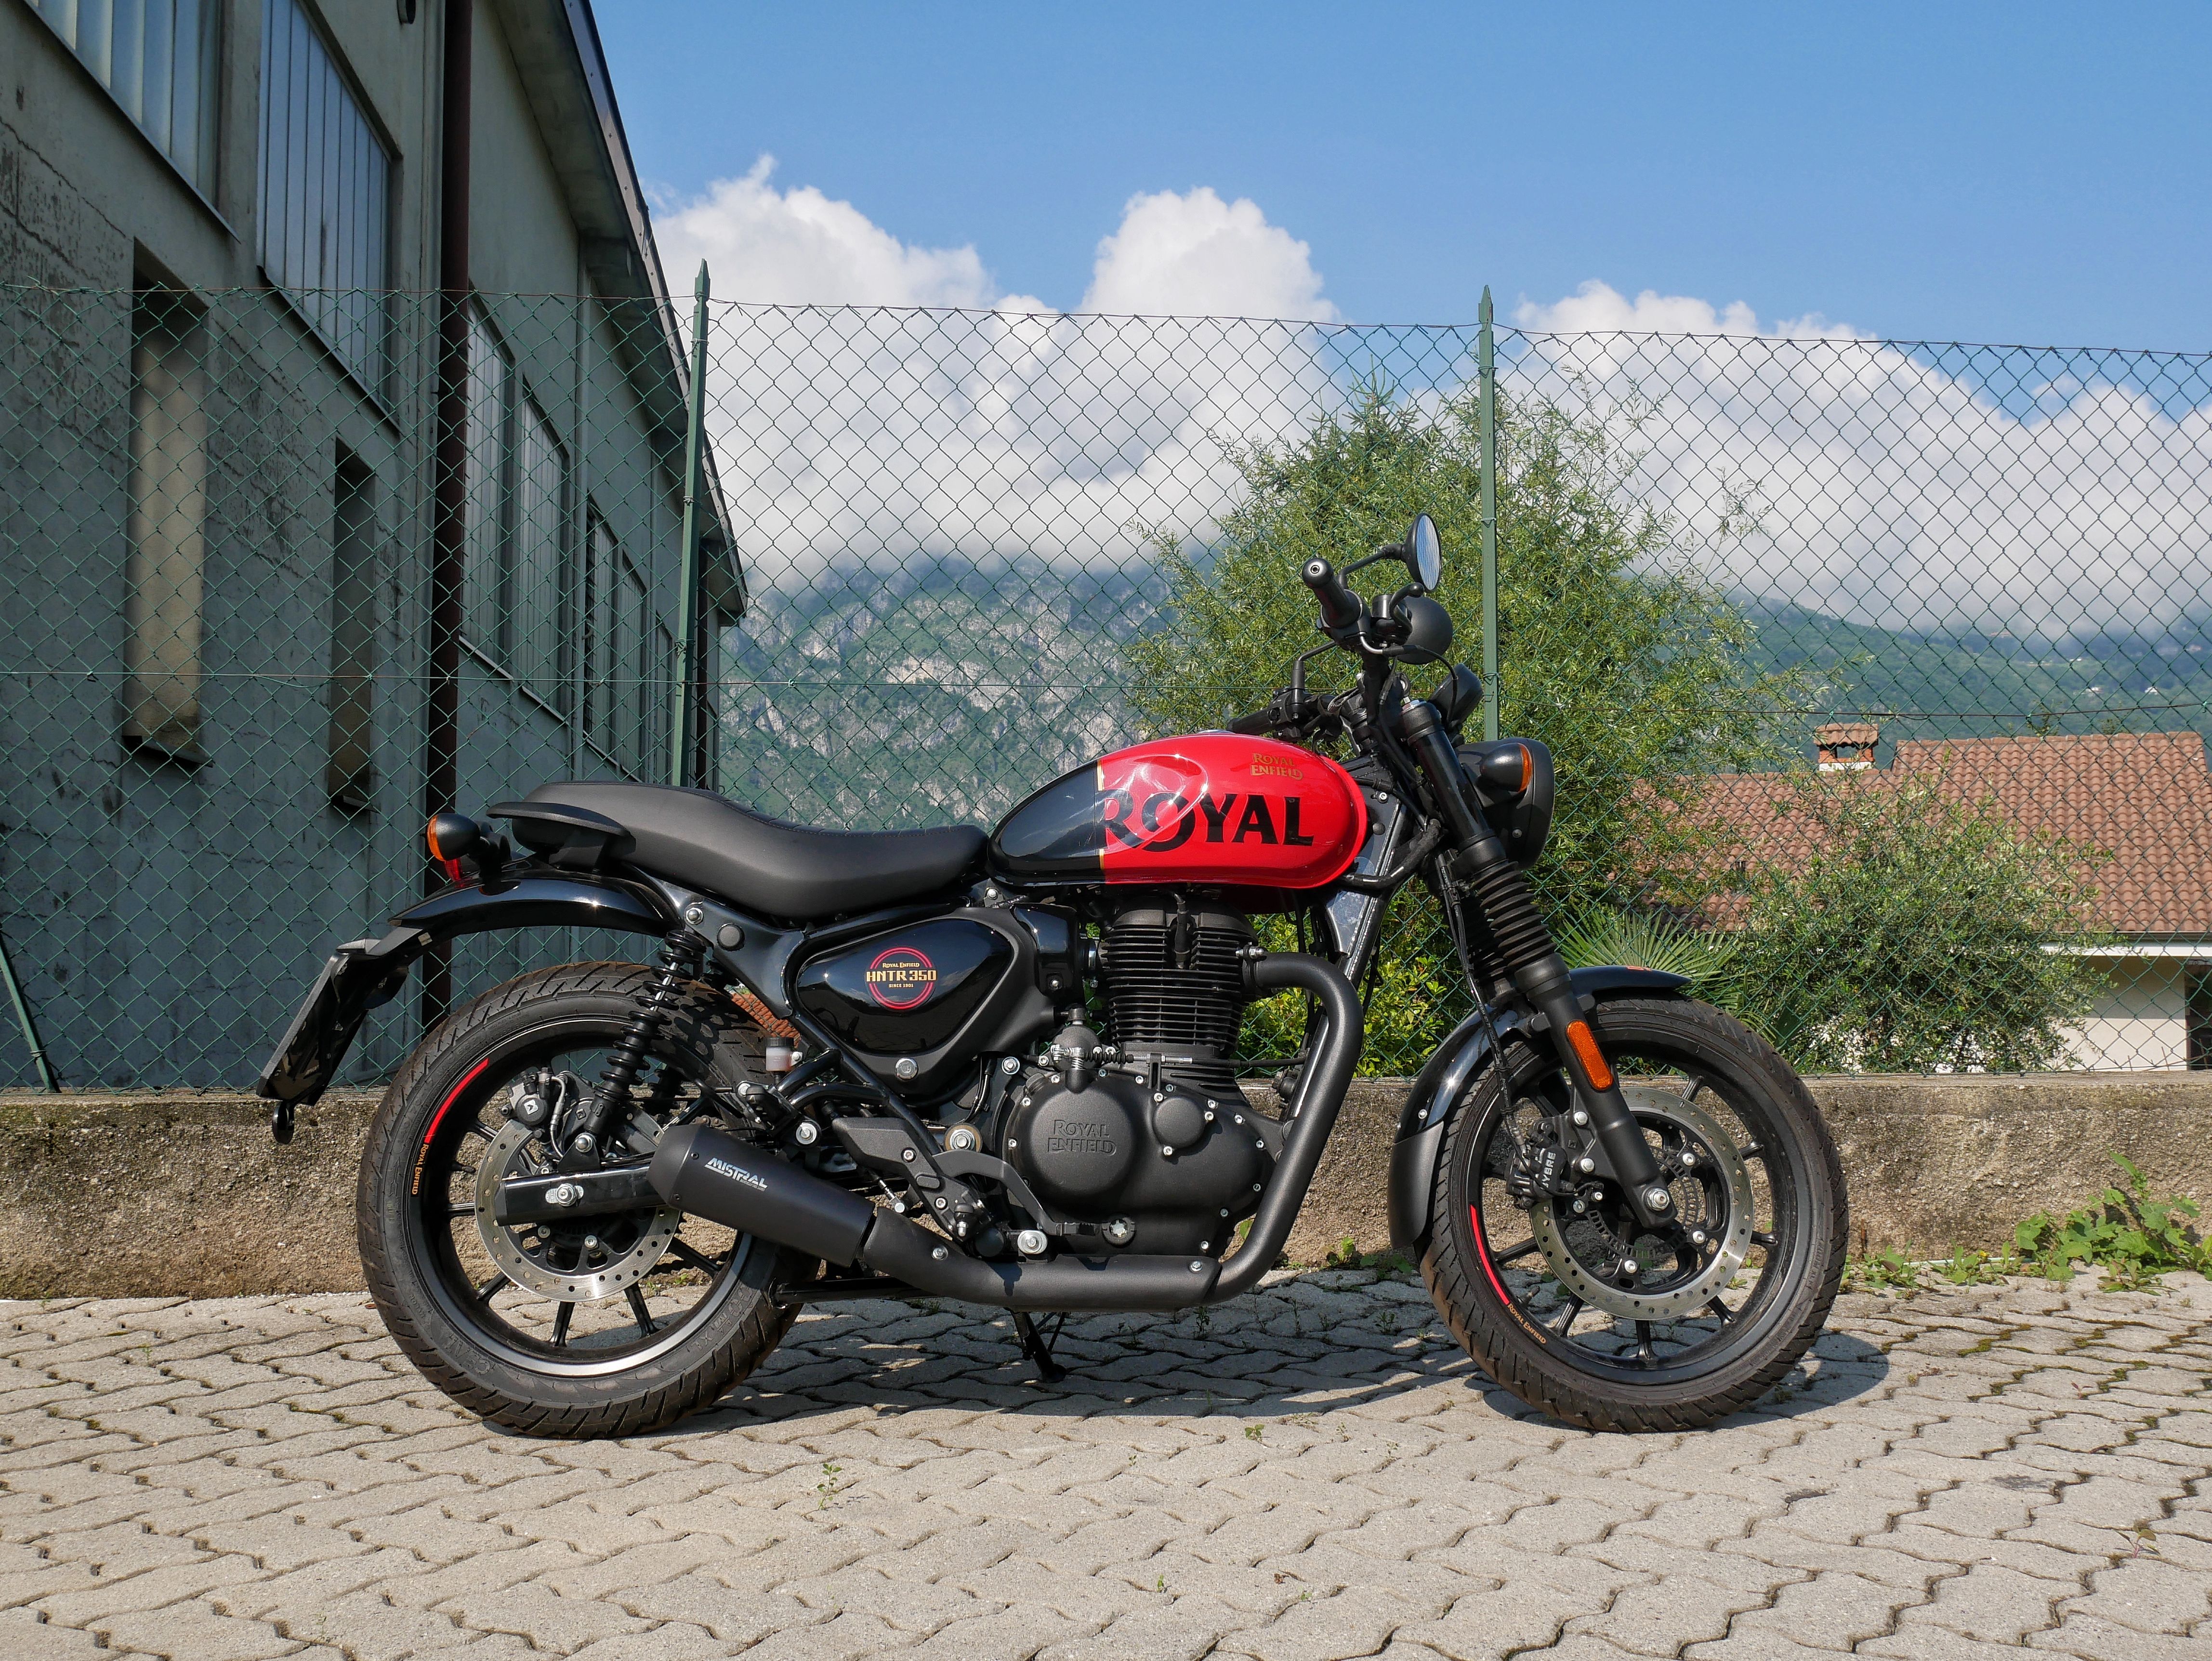 Royal Enfield Hunter 350 (black paint) conical exhaust